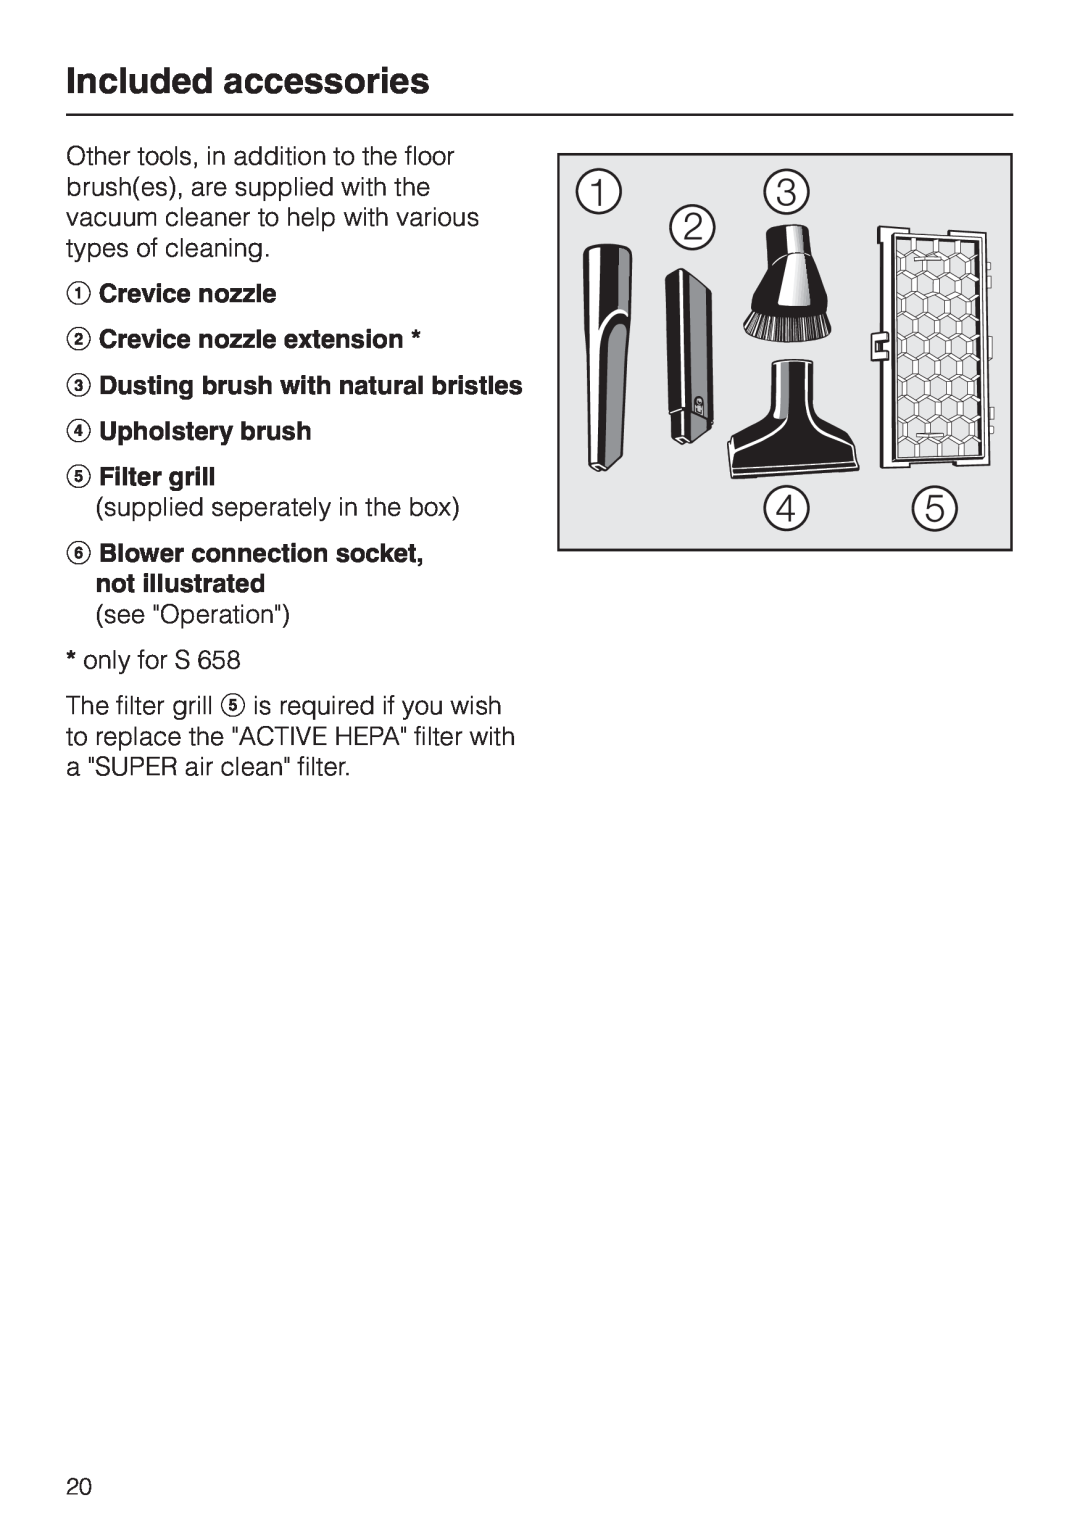 Miele S 658 manual Included accessories, a Crevice nozzle b Crevice nozzle extension, e Filter grill 